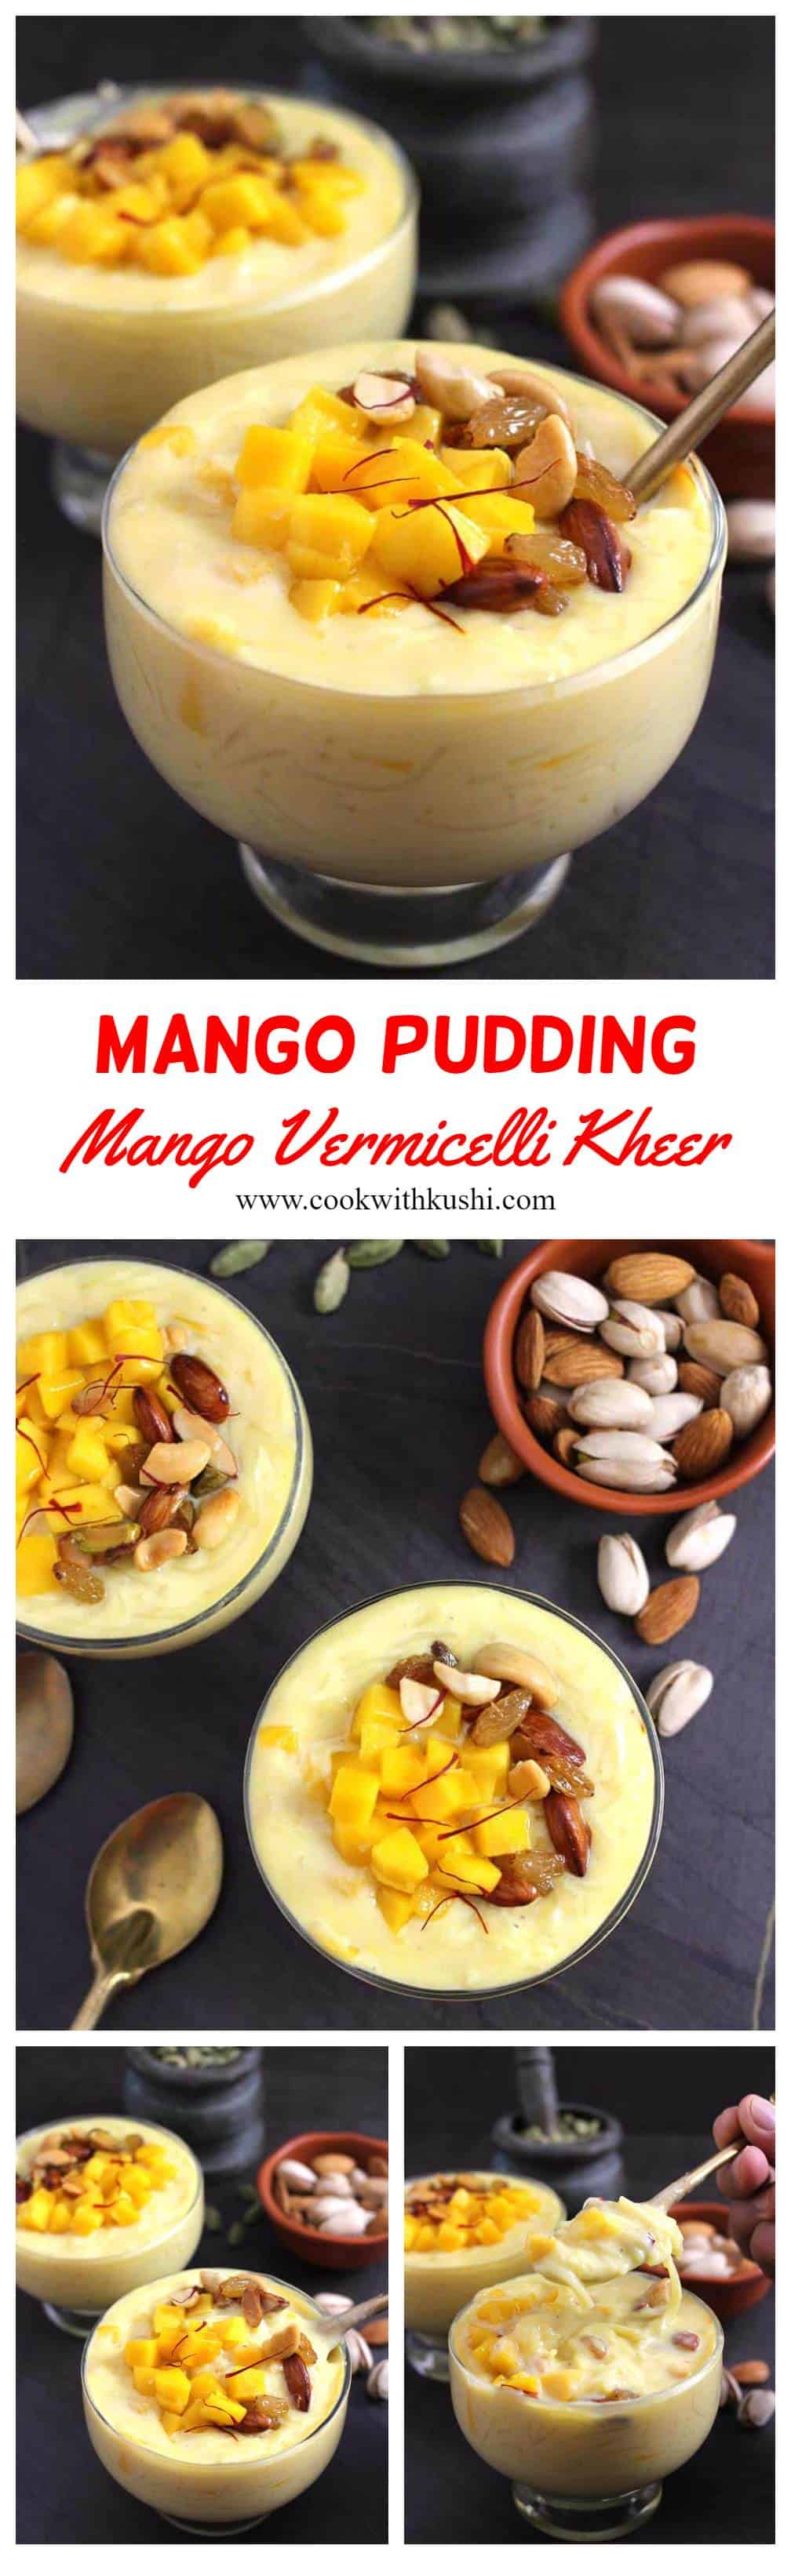 Mango Vermicelli Kheer is quick and easy, rich and classic, fuss free recipe, a  delicious twist to traditional kheer, a popular Indian sweet prepared using milk, vermicelli, sugar and flavored with cardamom powder and saffron. #kheer #instantpot #mangorecipes #mangodesserts #mangopudding #vermicellikheer #semiyapayasam #seviyankheer #eidrecipes #diwalirecipes #ugadirecipes #ramzan #christmas #indiansweets #indiandesserts 